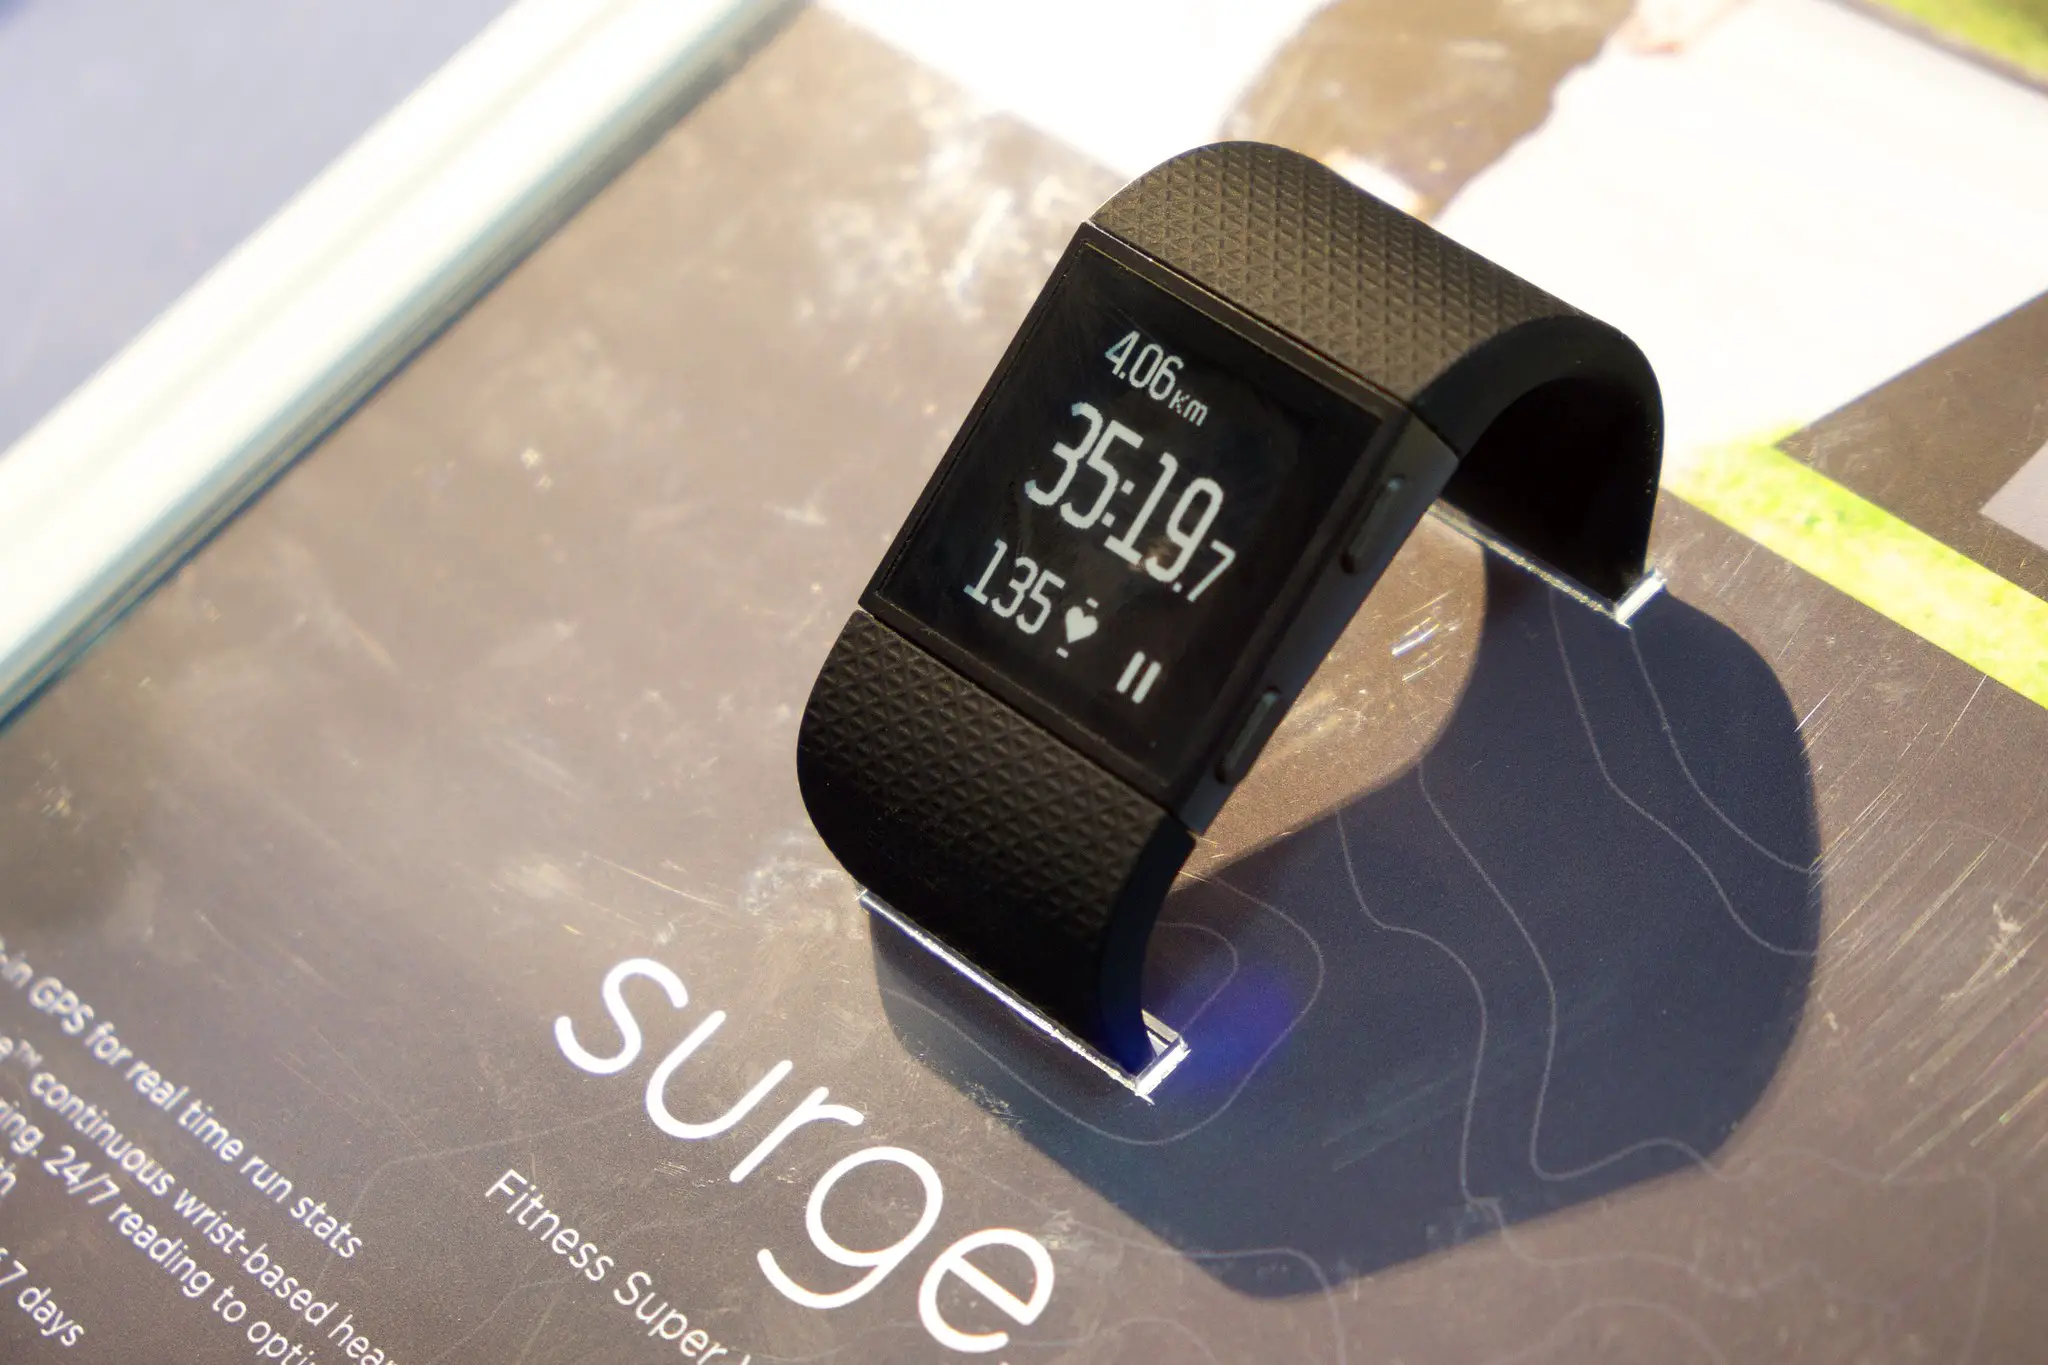 How to Change Time on Fitbit Surge